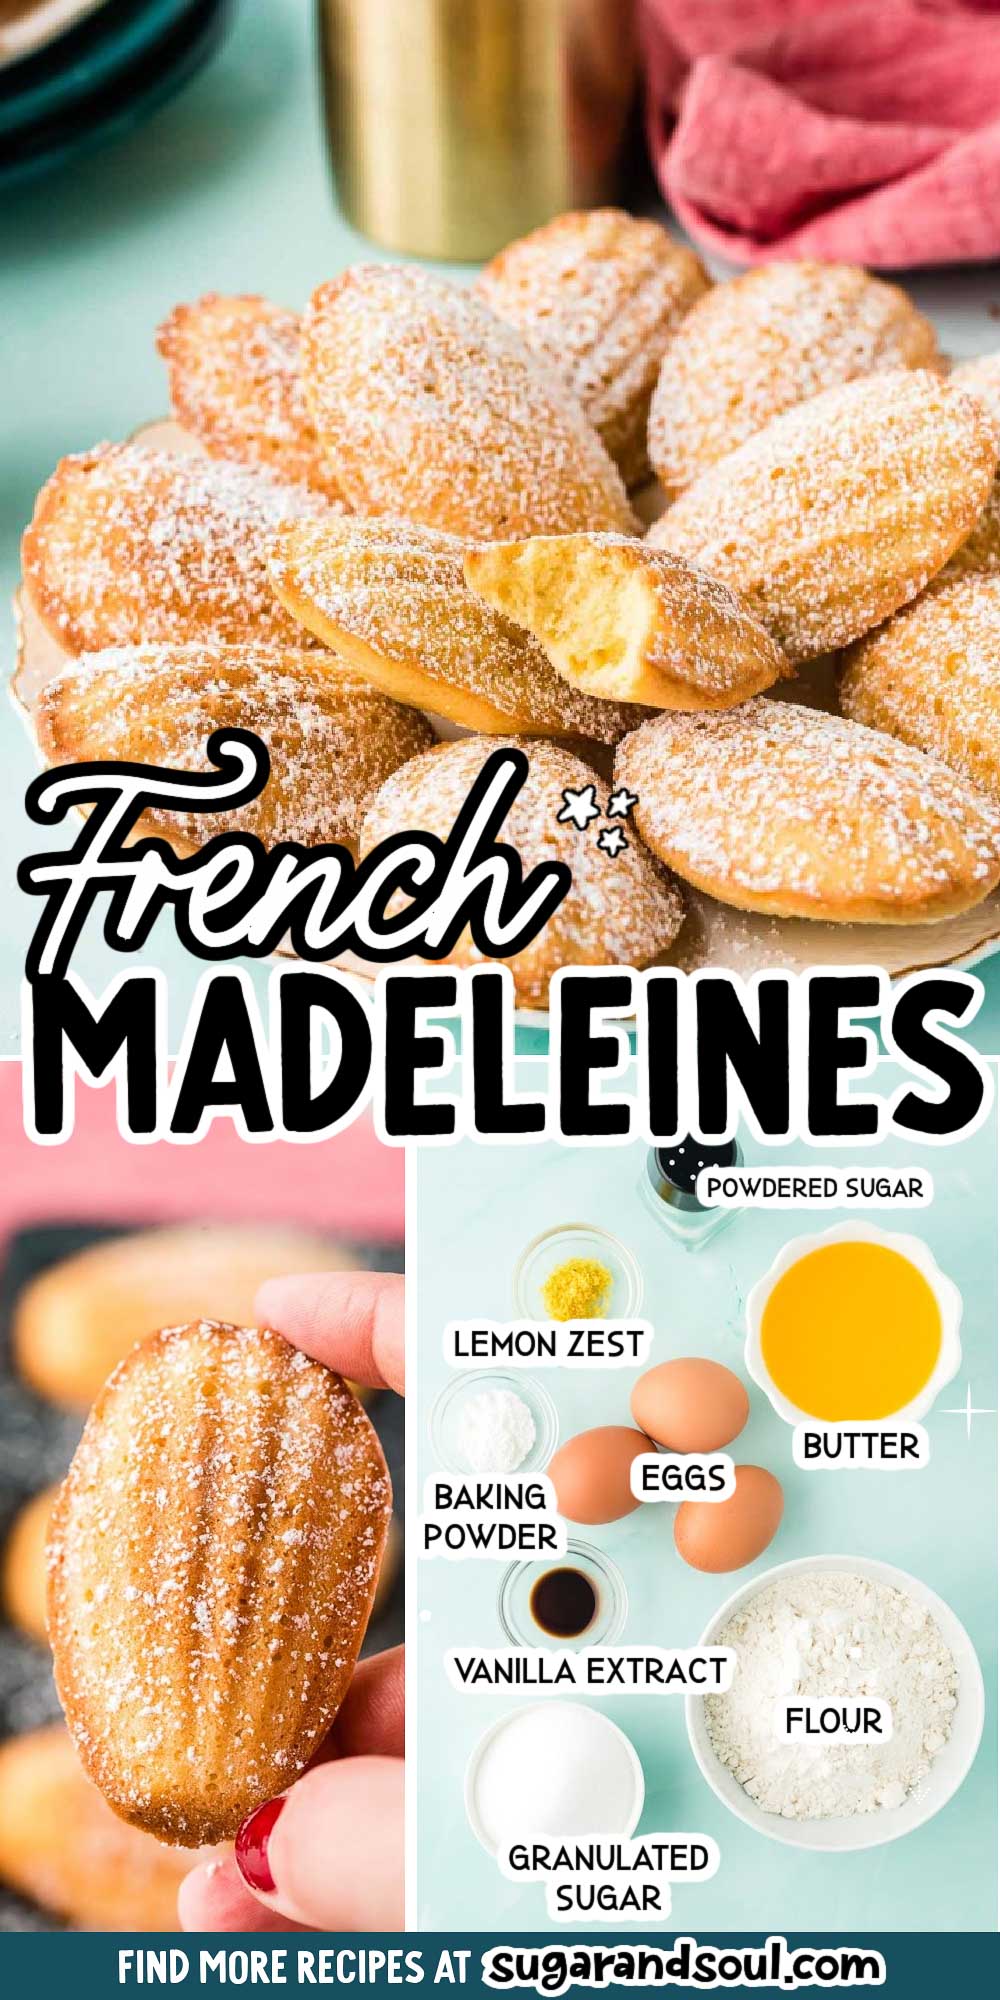 French Madeleines are light, airy, and buttery mini sponge cakes with a scalloped shell shape and golden crisp edges! These cakes are sweet with a hint of lemon, perfect for enjoying alongside a cup of hot tea or coffee! via @sugarandsoulco